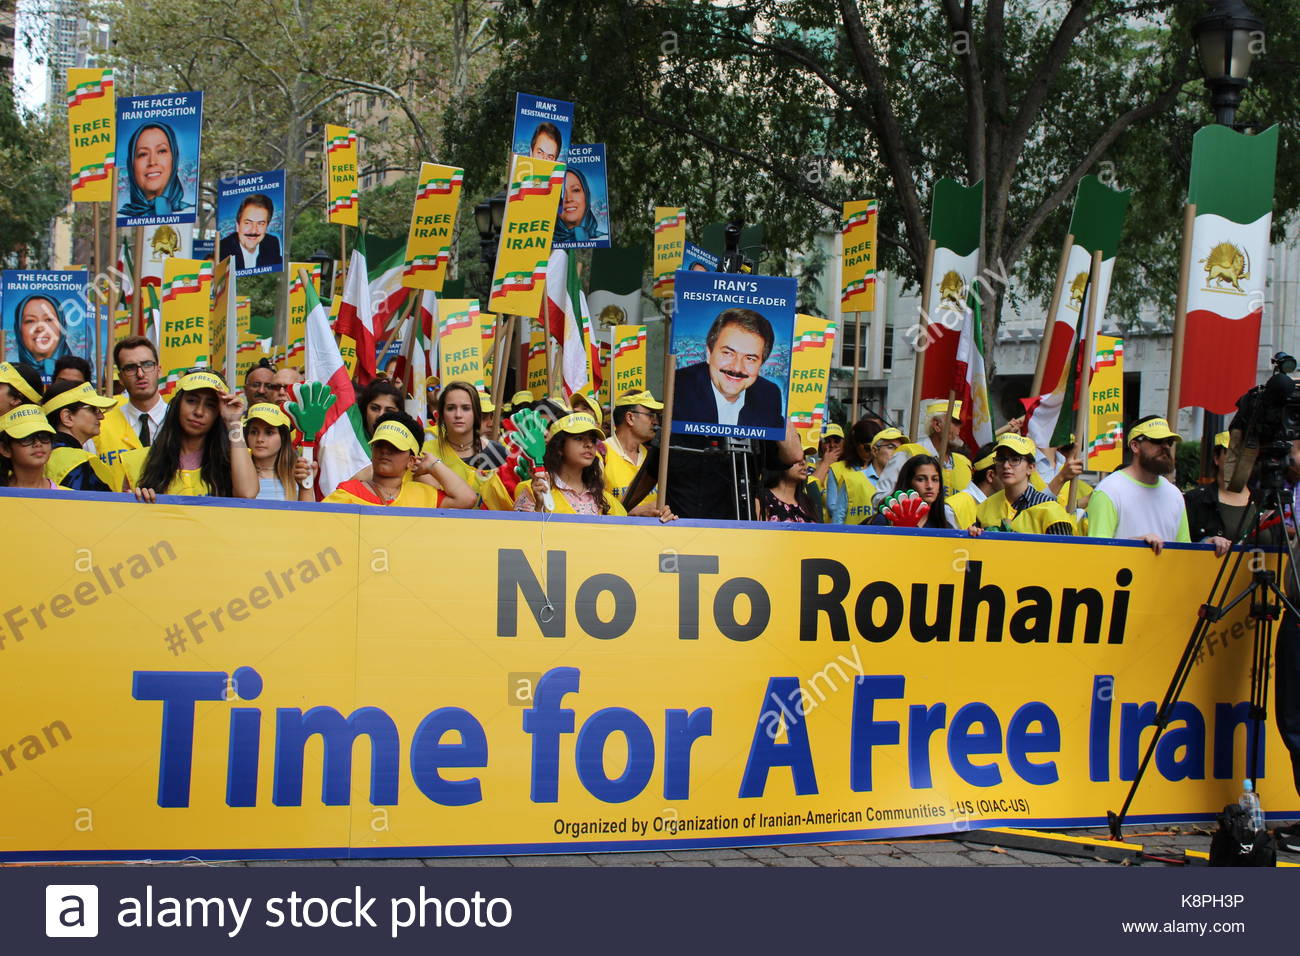 new-york-united-states-20th-sep-2017-united-nations-protests-iranian-K8PH3P.jpg